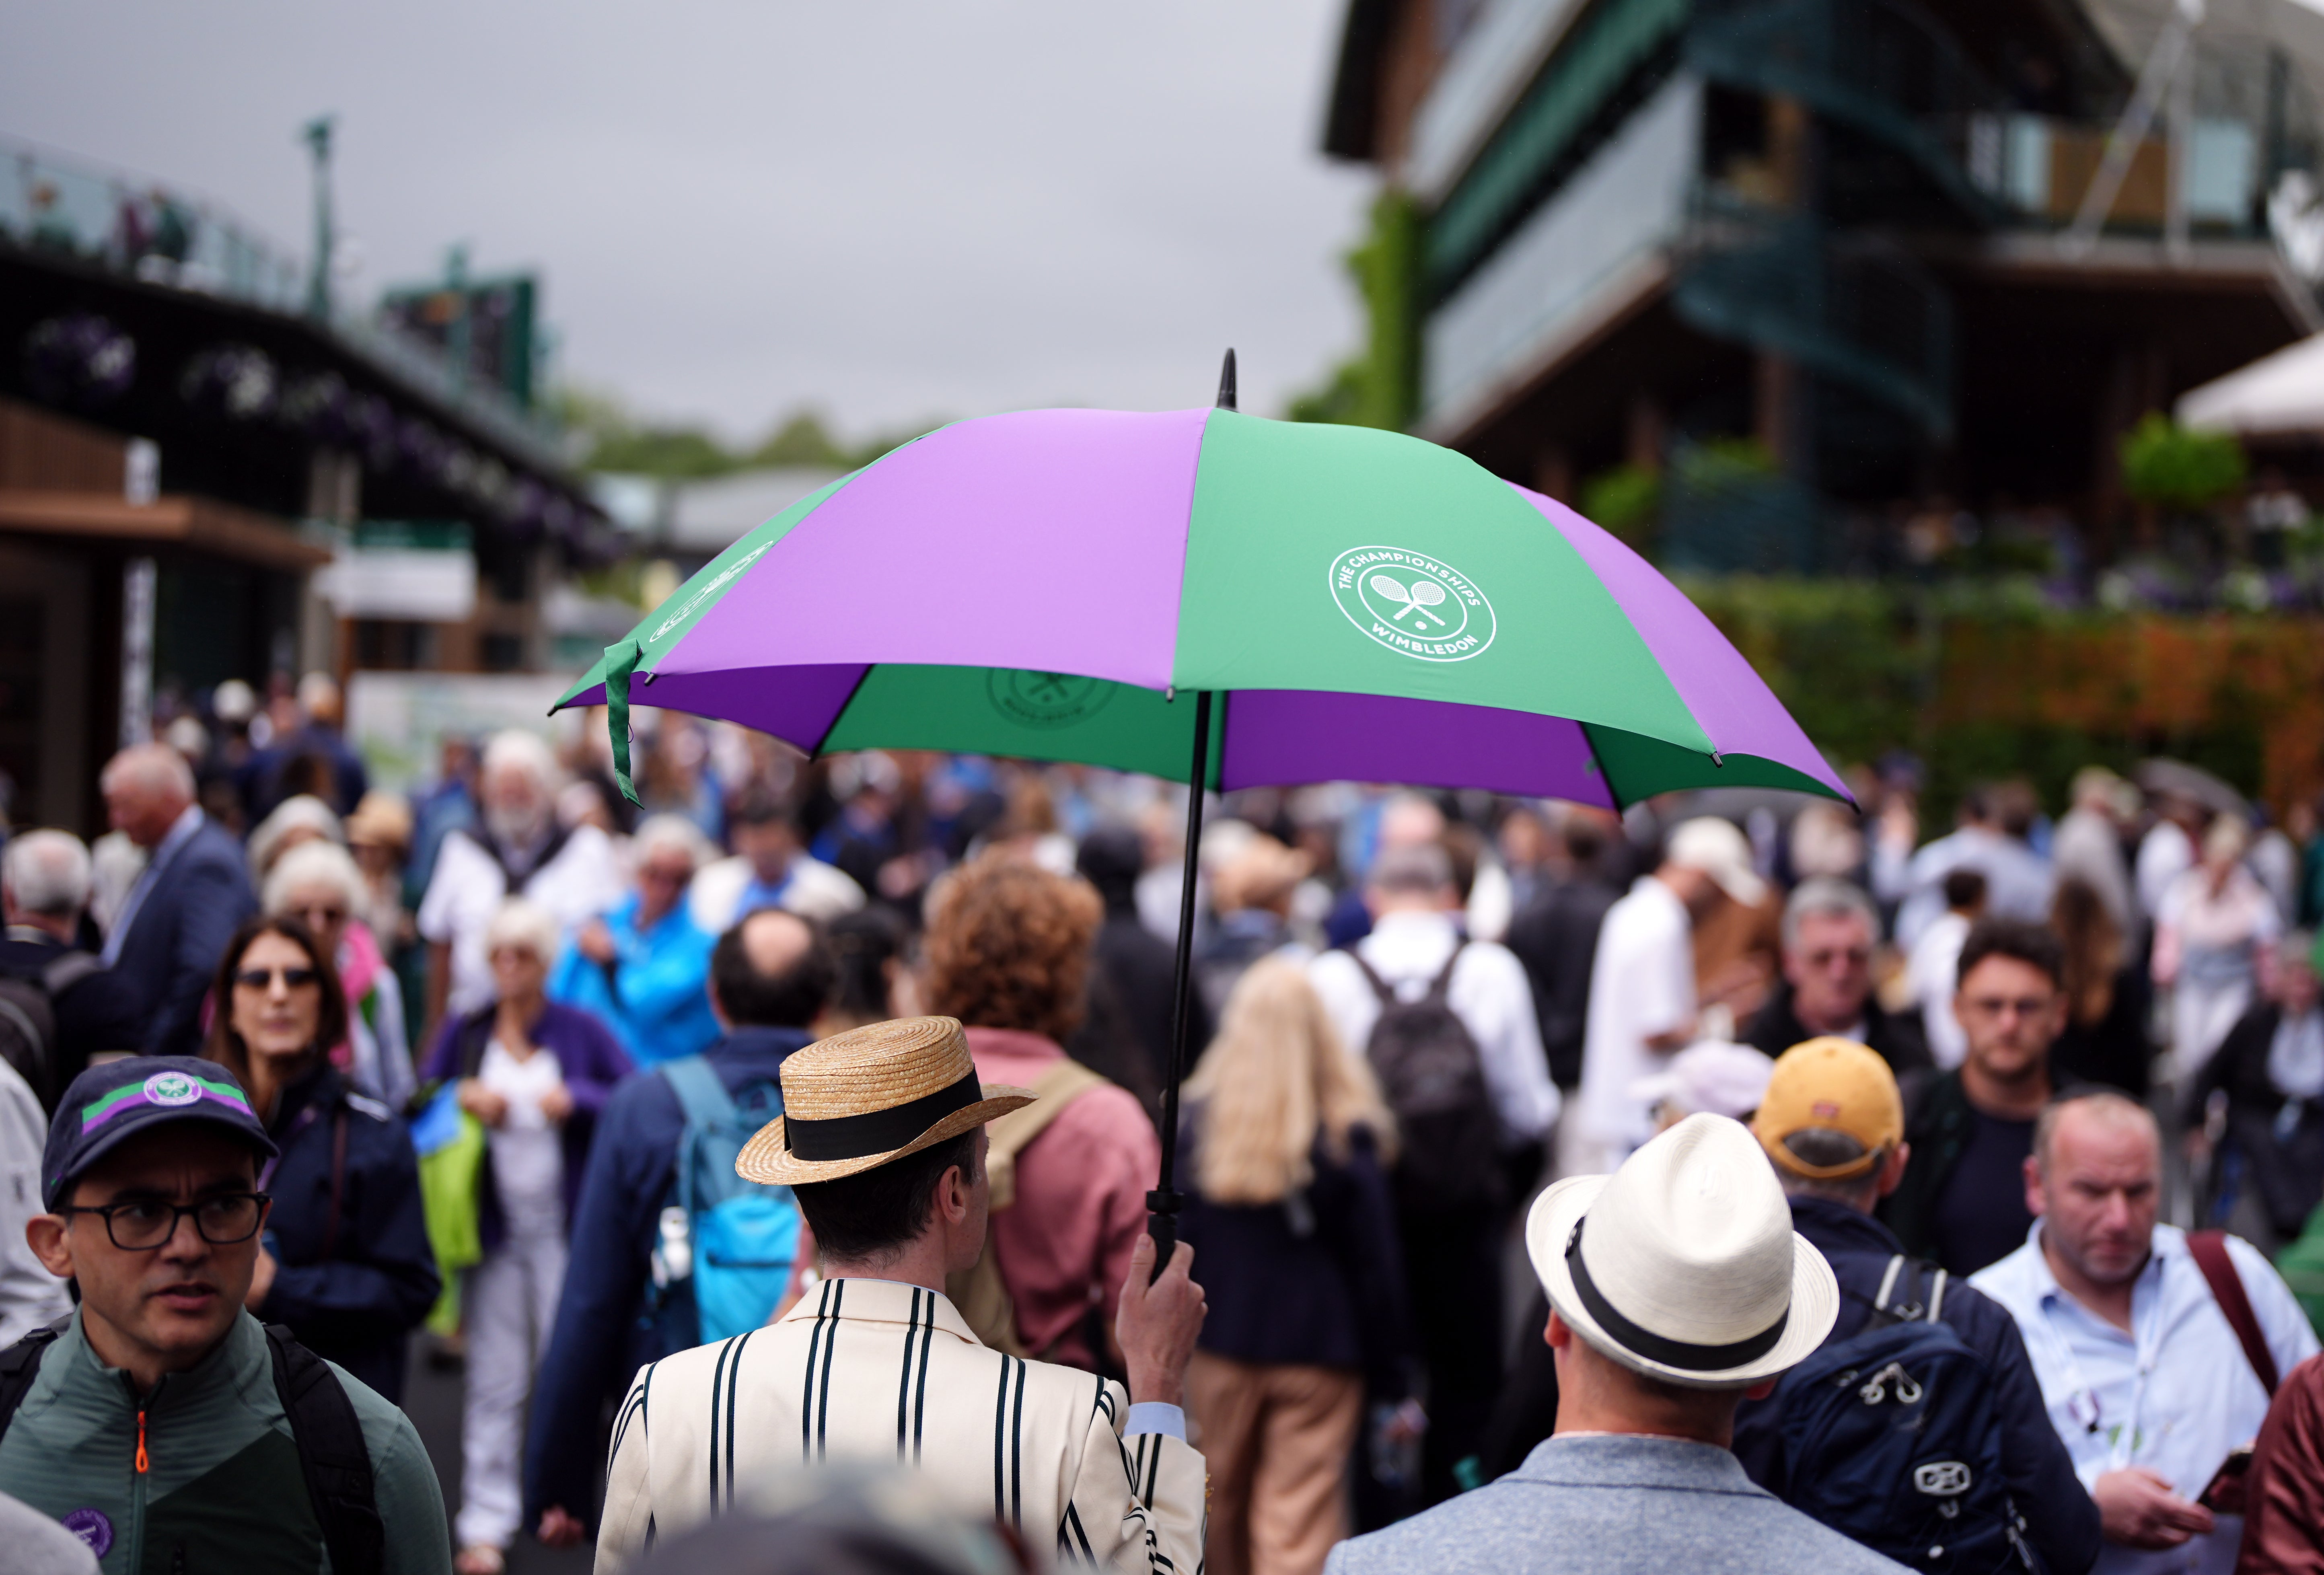 Wimbledon has some wet weather in store for spectators this year (Zac Goodwin/PA)